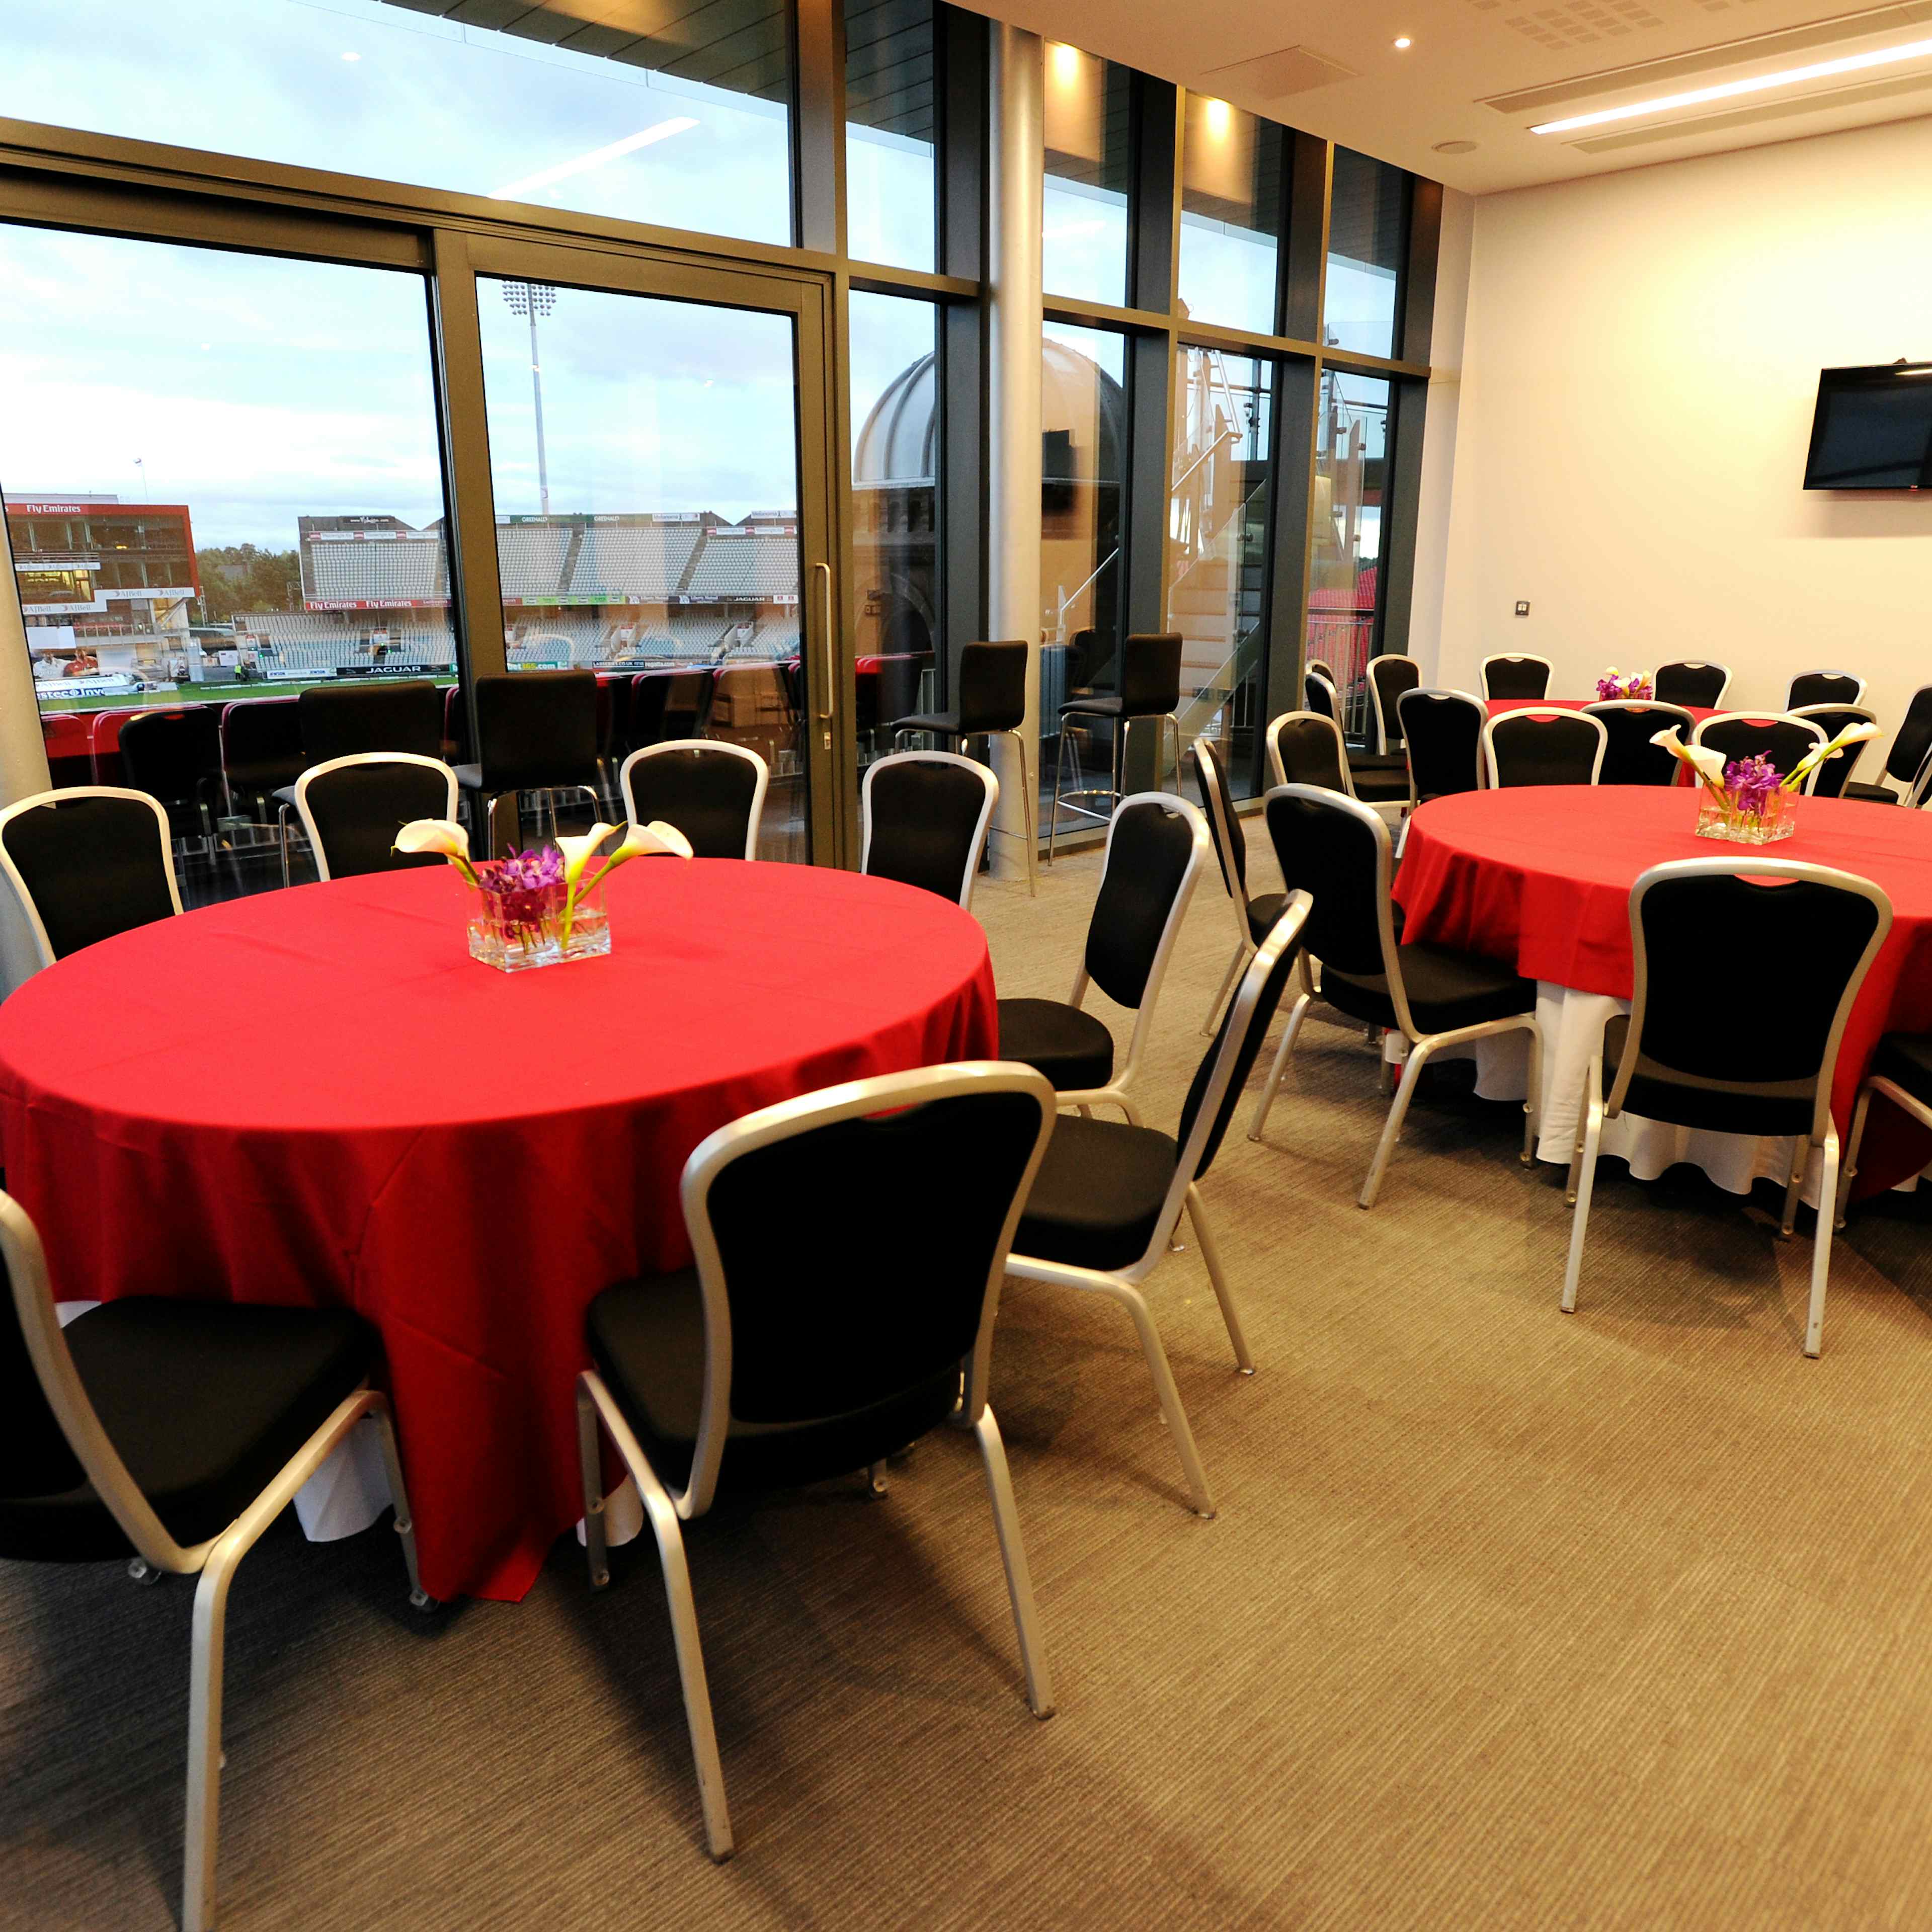 Emirates Old Trafford  - The Boardroom image 3